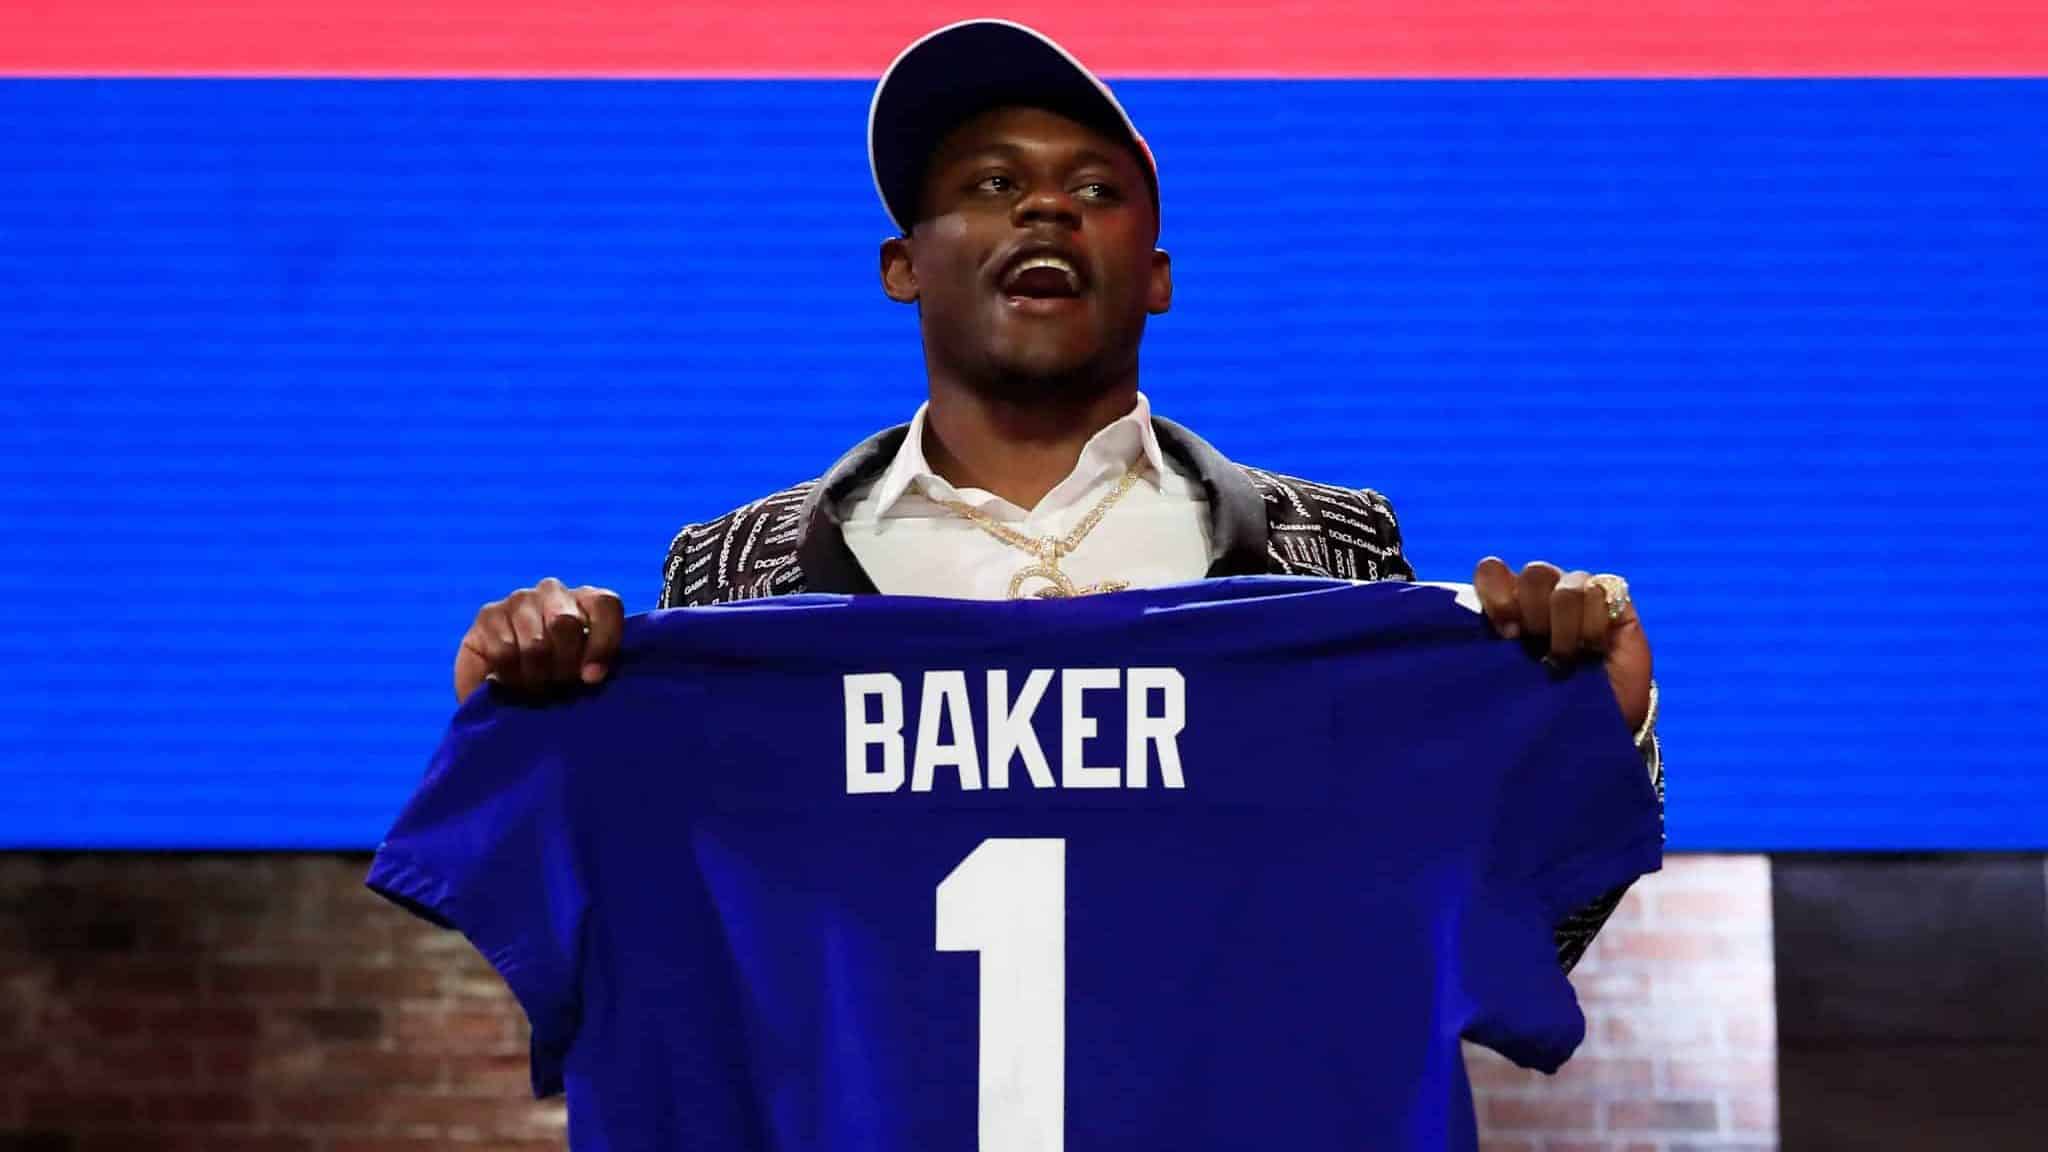 NASHVILLE, TENNESSEE - APRIL 25: Deandre Baker of Georgia reacts after being chosen #30 overall by the New York Giants during the first round of the 2019 NFL Draft on April 25, 2019 in Nashville, Tennessee.